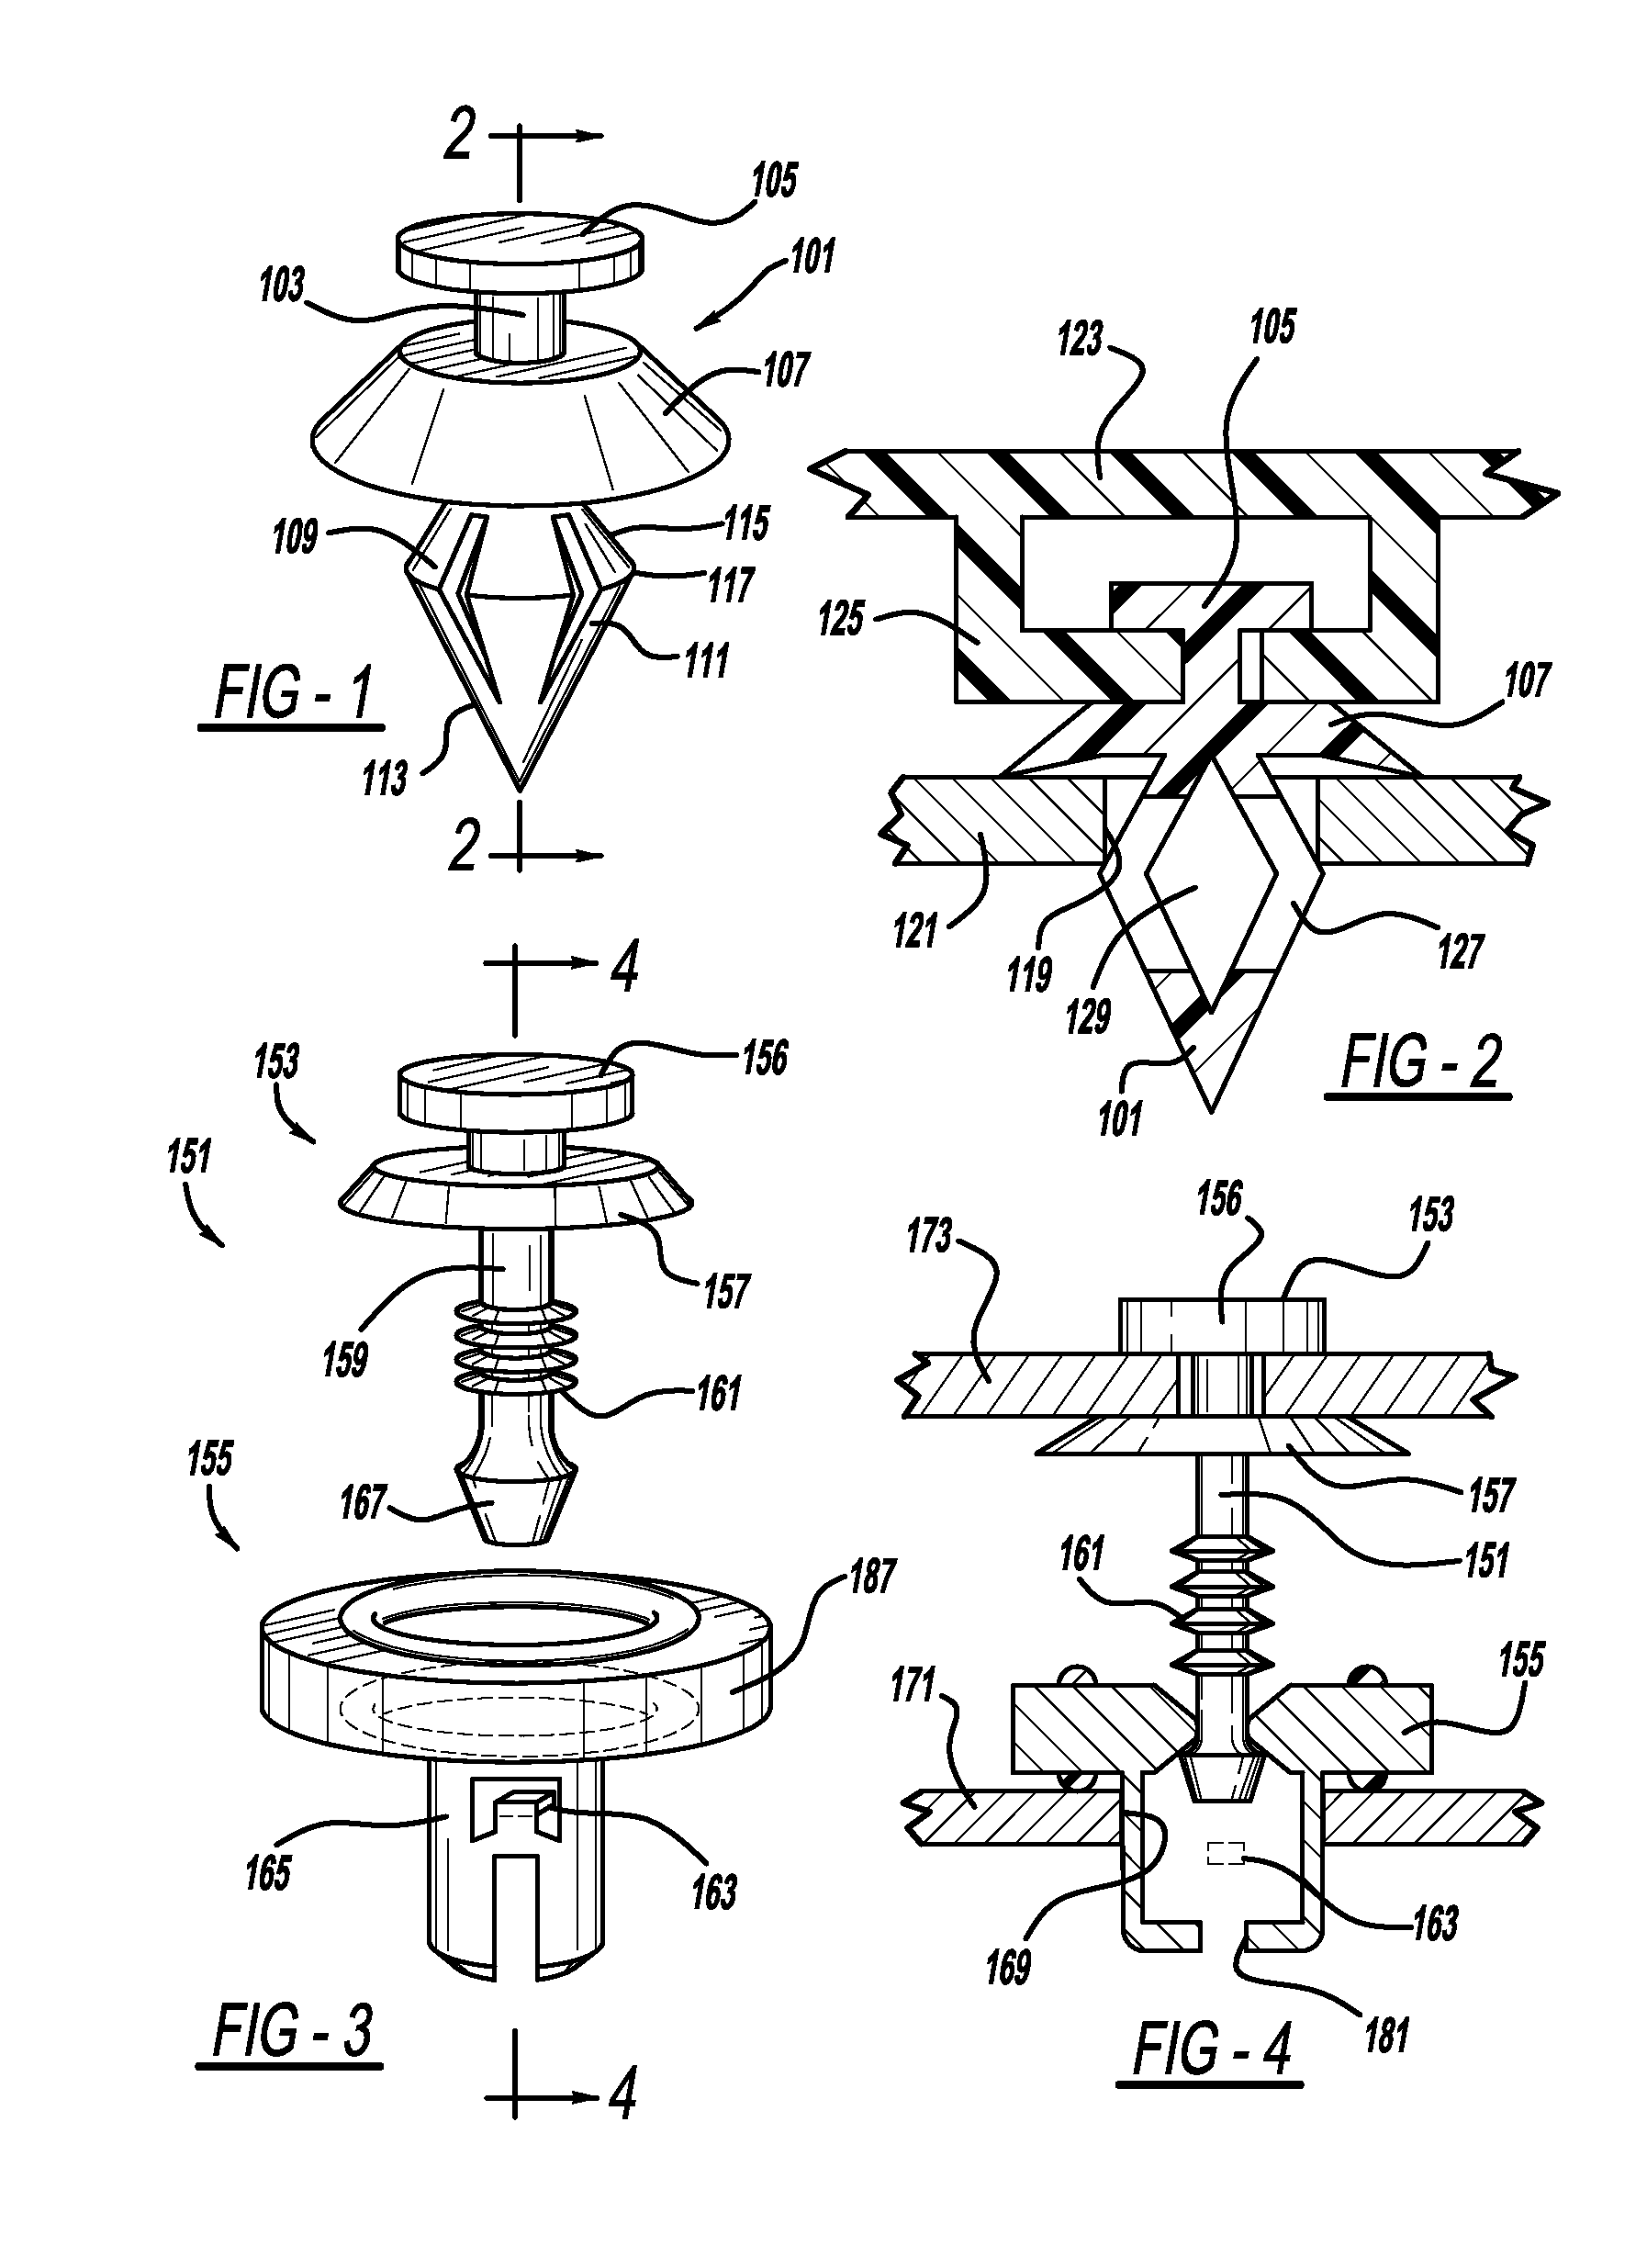 Fasteners manufactured by three-dimensional printing